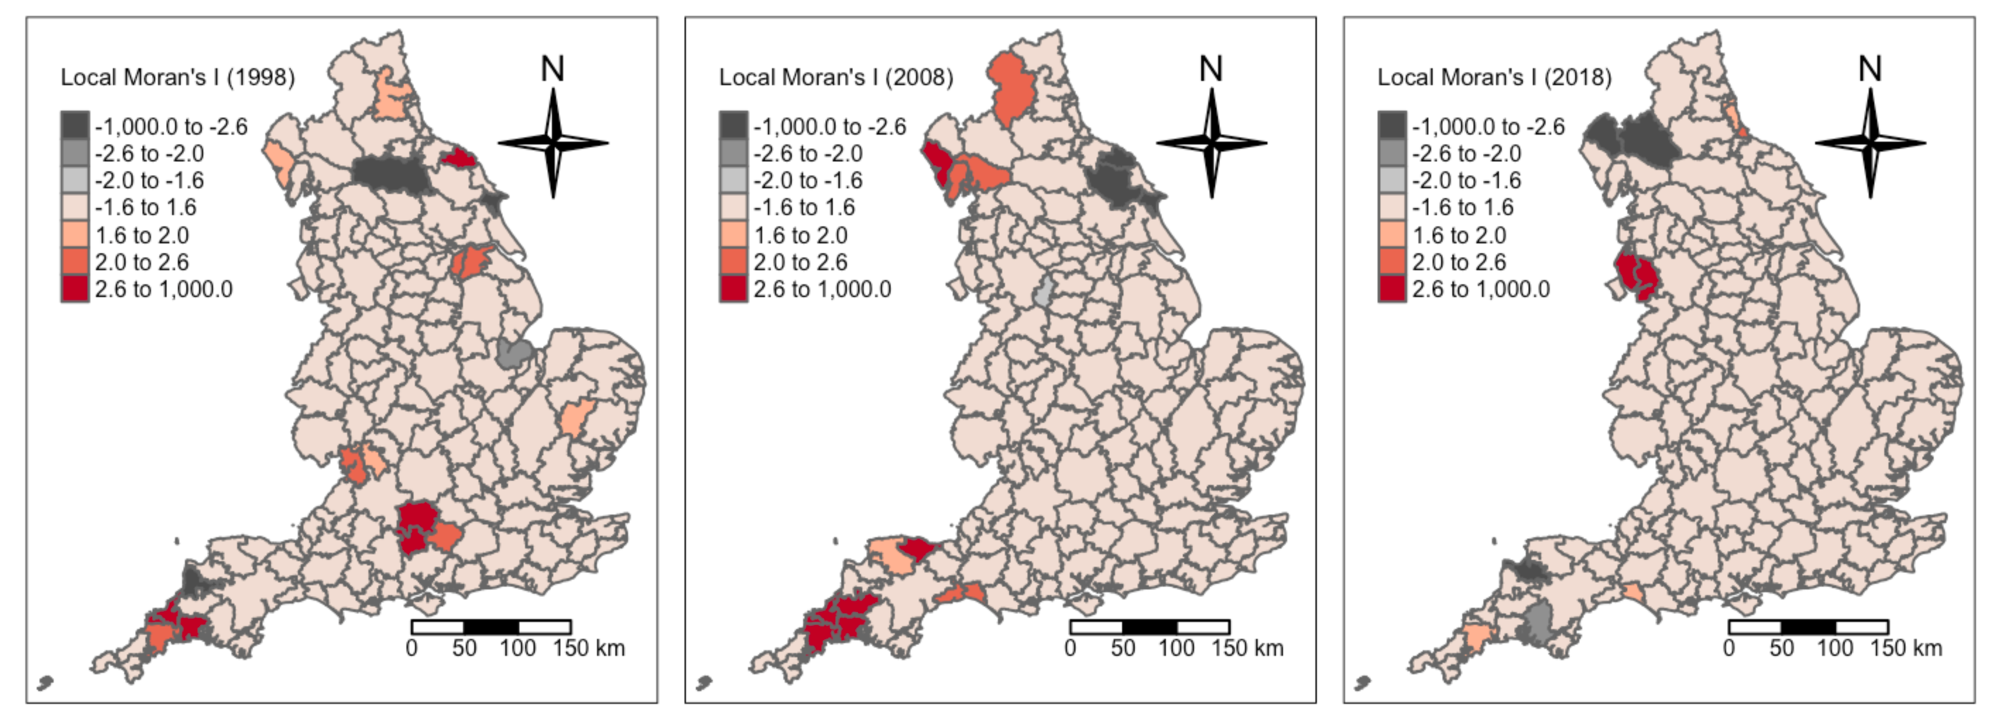 Local Moran's I Spatial Analysis for Entry Rate in England for Three Time Periods